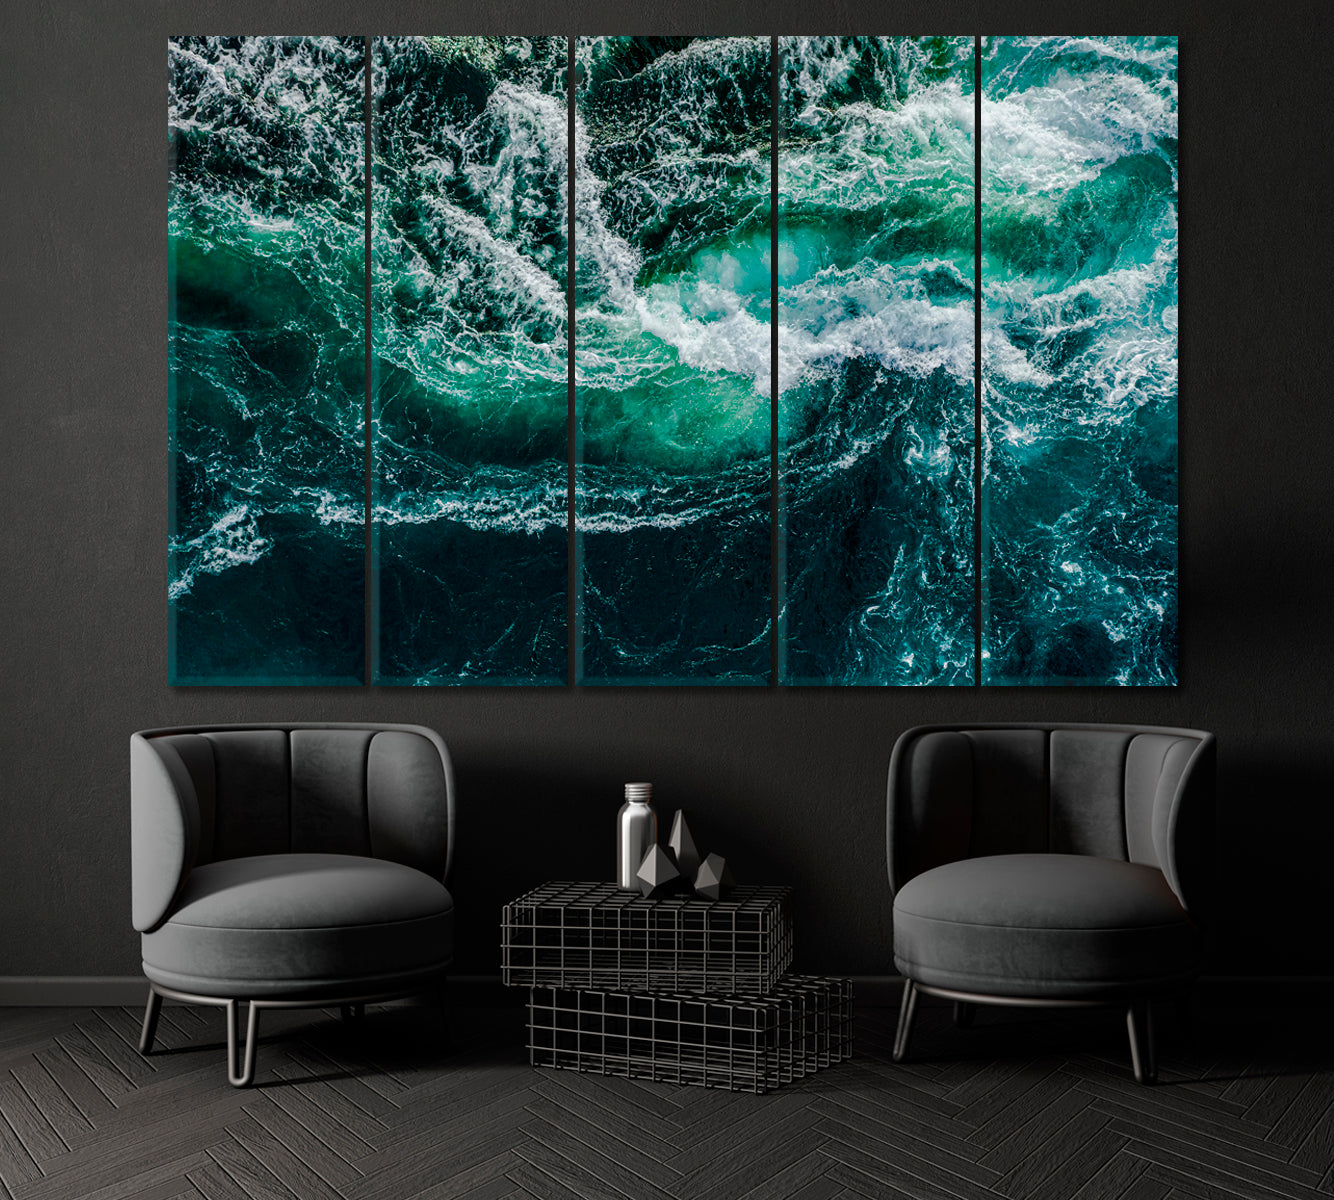 Whirlpools of Saltstraumen Nordland Norway Canvas Print ArtLexy 5 Panels 36"x24" inches 